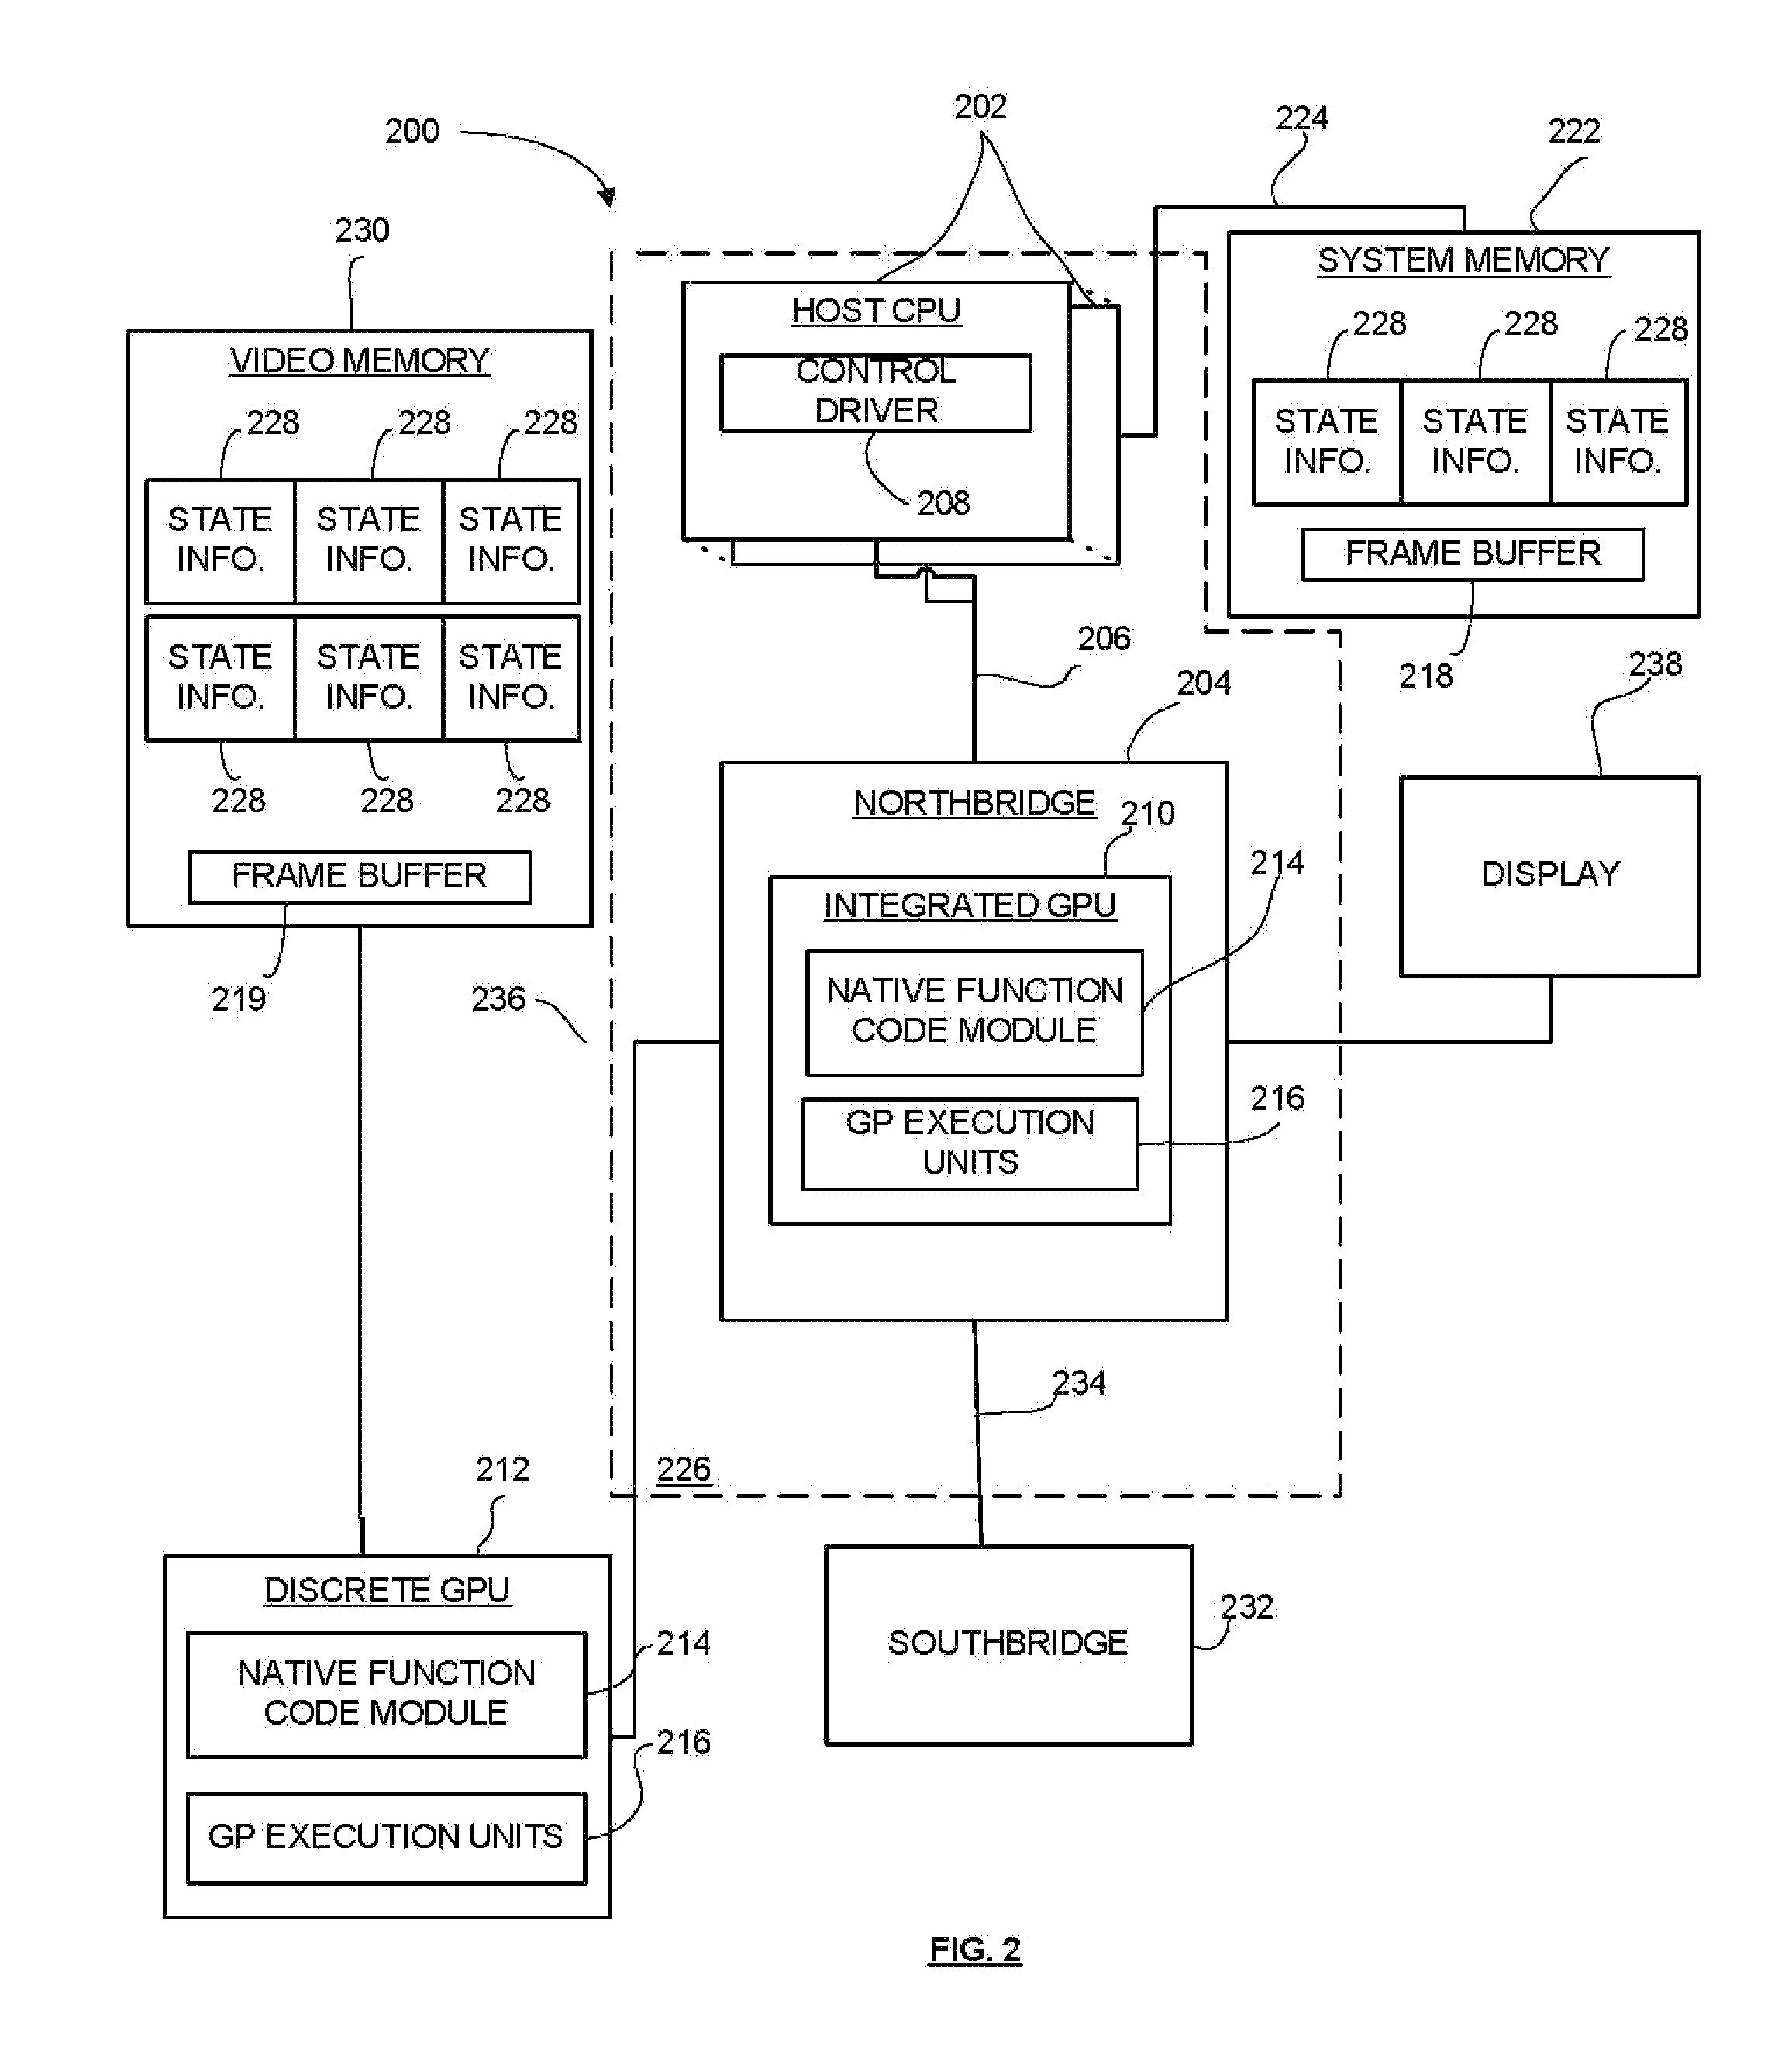 Method, System, and Apparatus for Processing Video and/or Graphics Data Using Multiple Processors Without Losing State Information